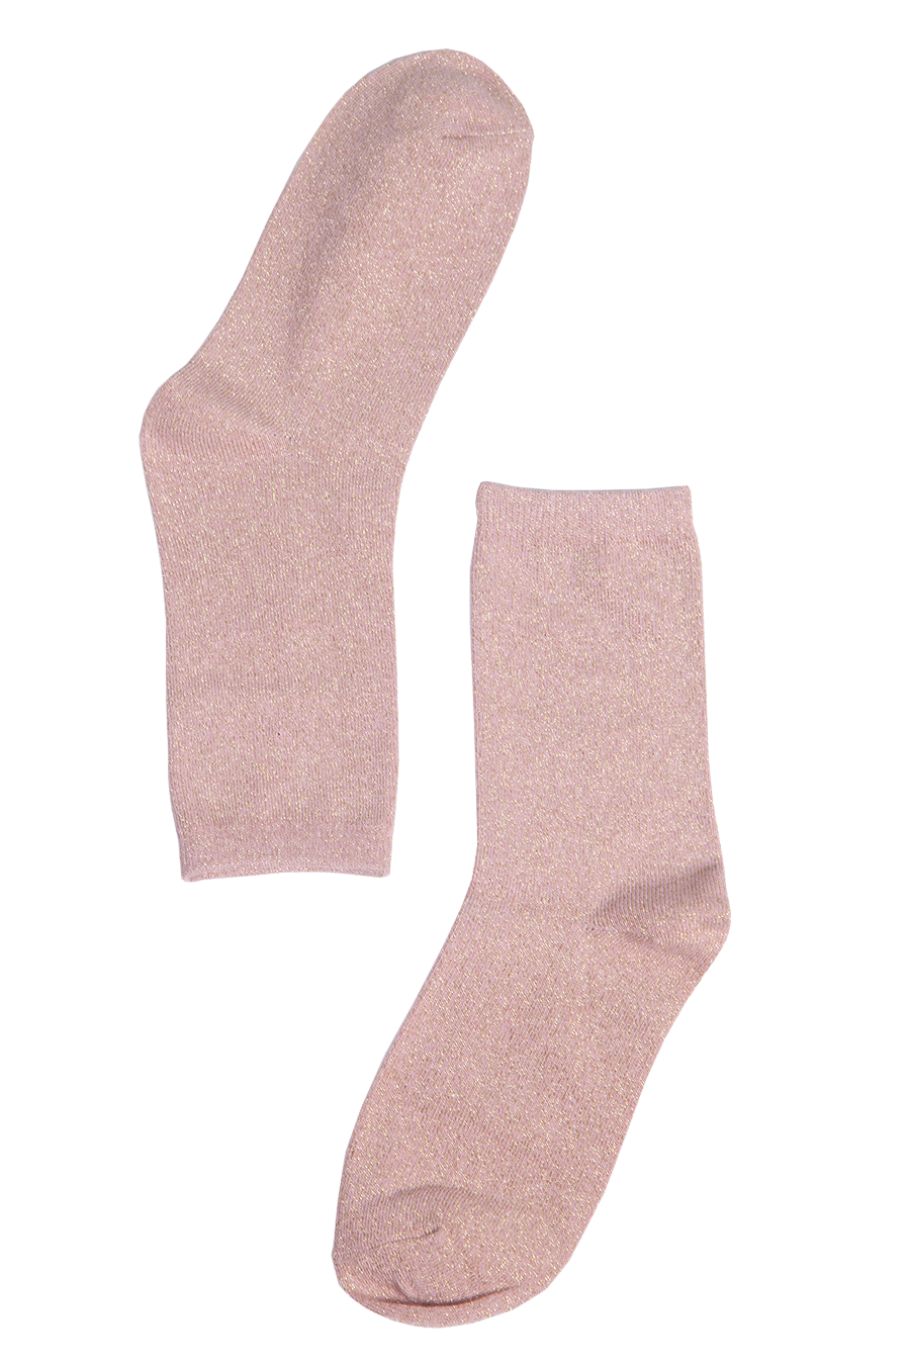 pink and gold glitter ankle socks